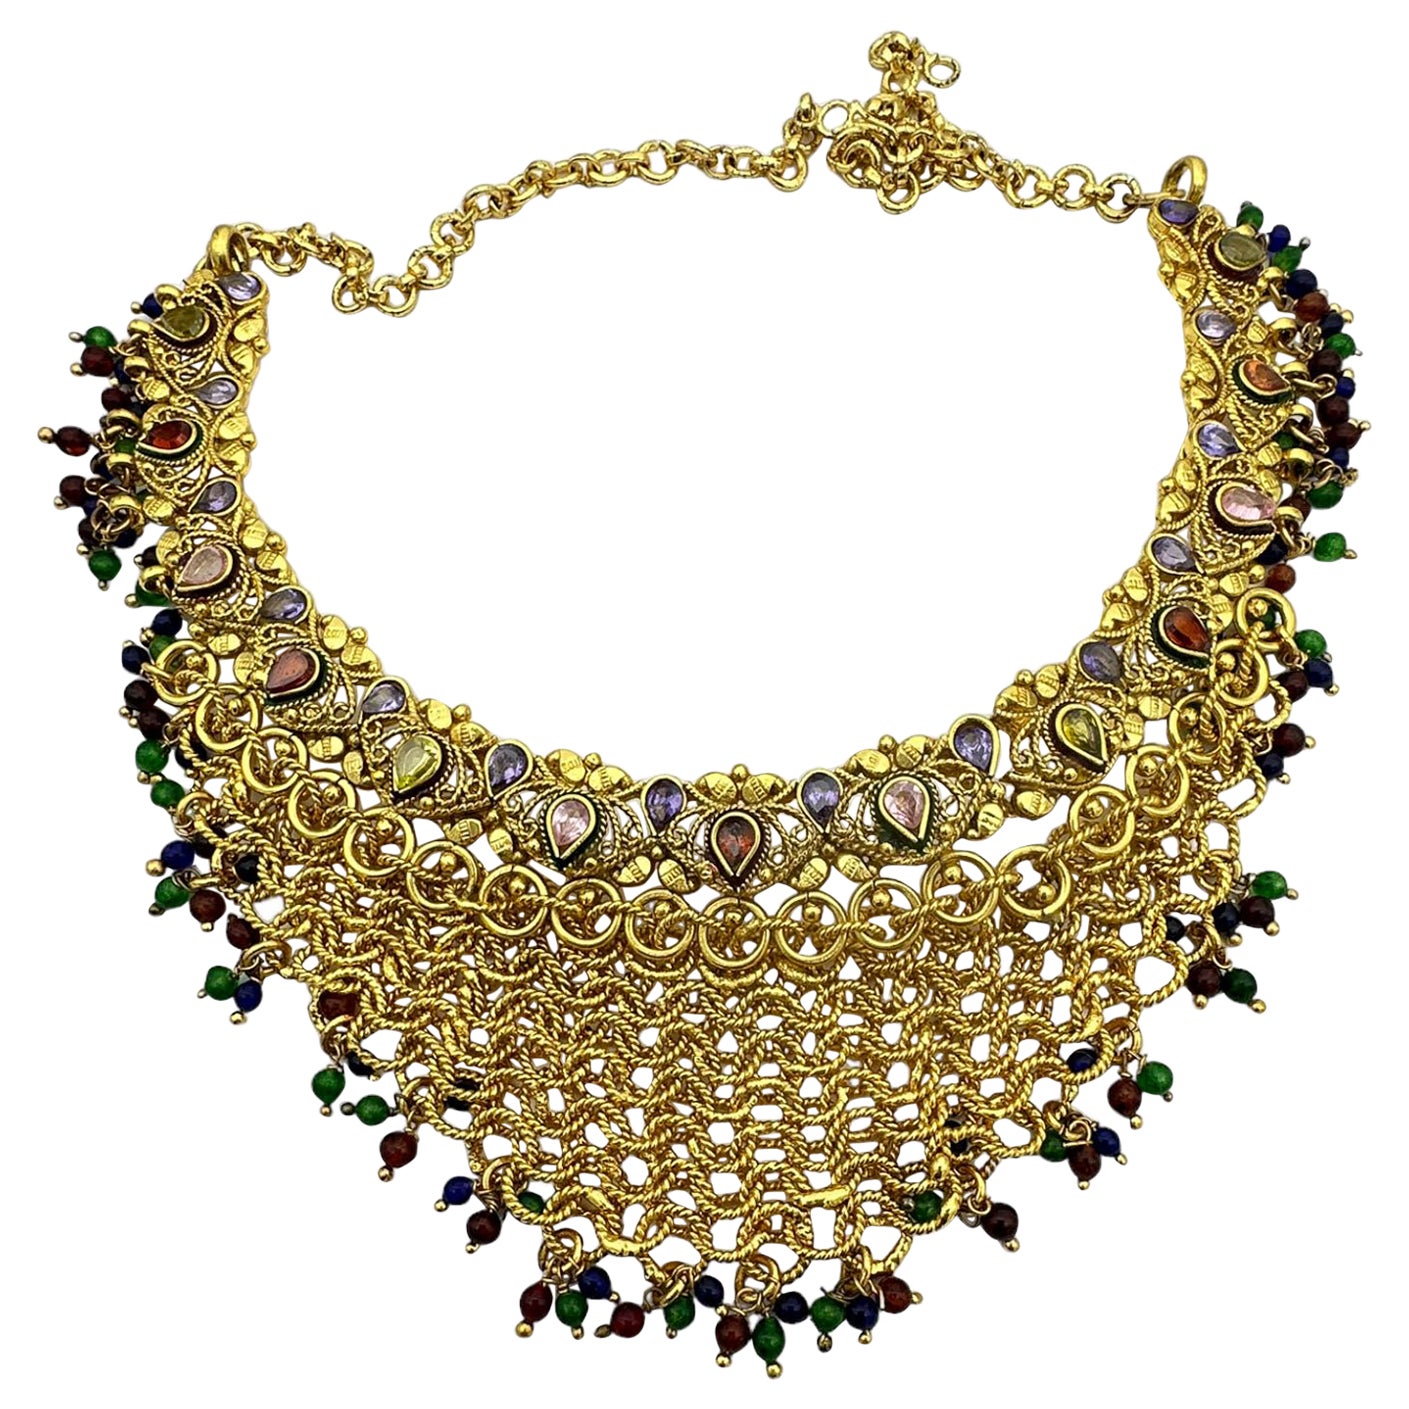 Egyptian Mesh, Jeweled Gem Colored Necklace 24K Electroplated